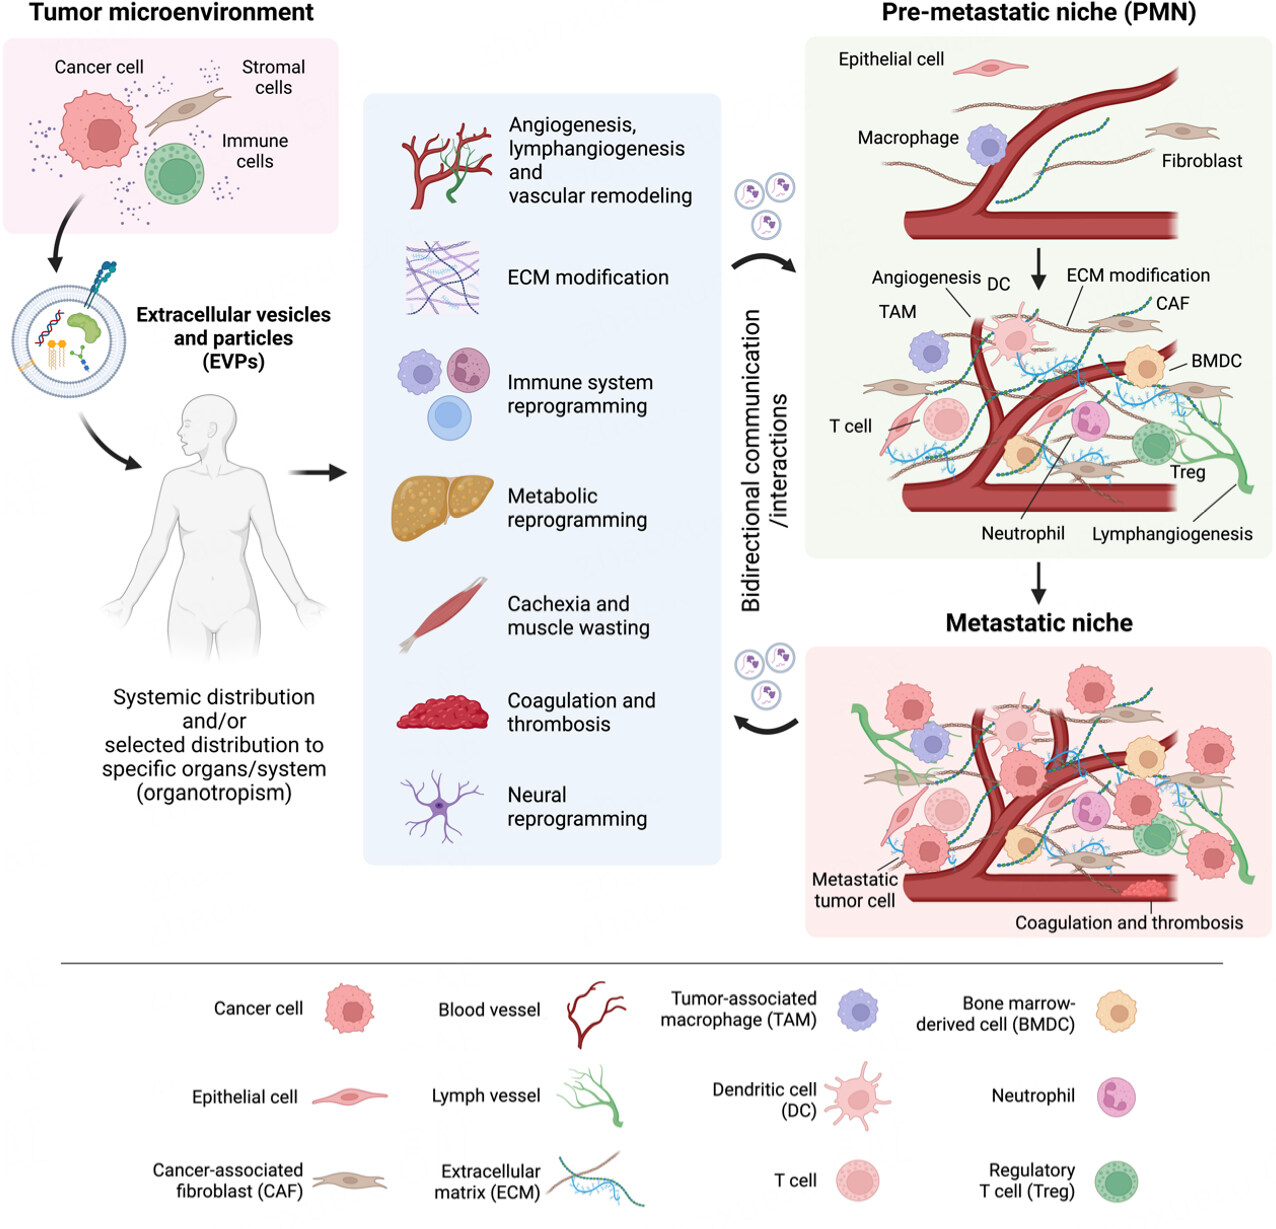 Extracellular vesicles and particles as mediators of long-range communication in cancer: connecting biological function to clinical applications